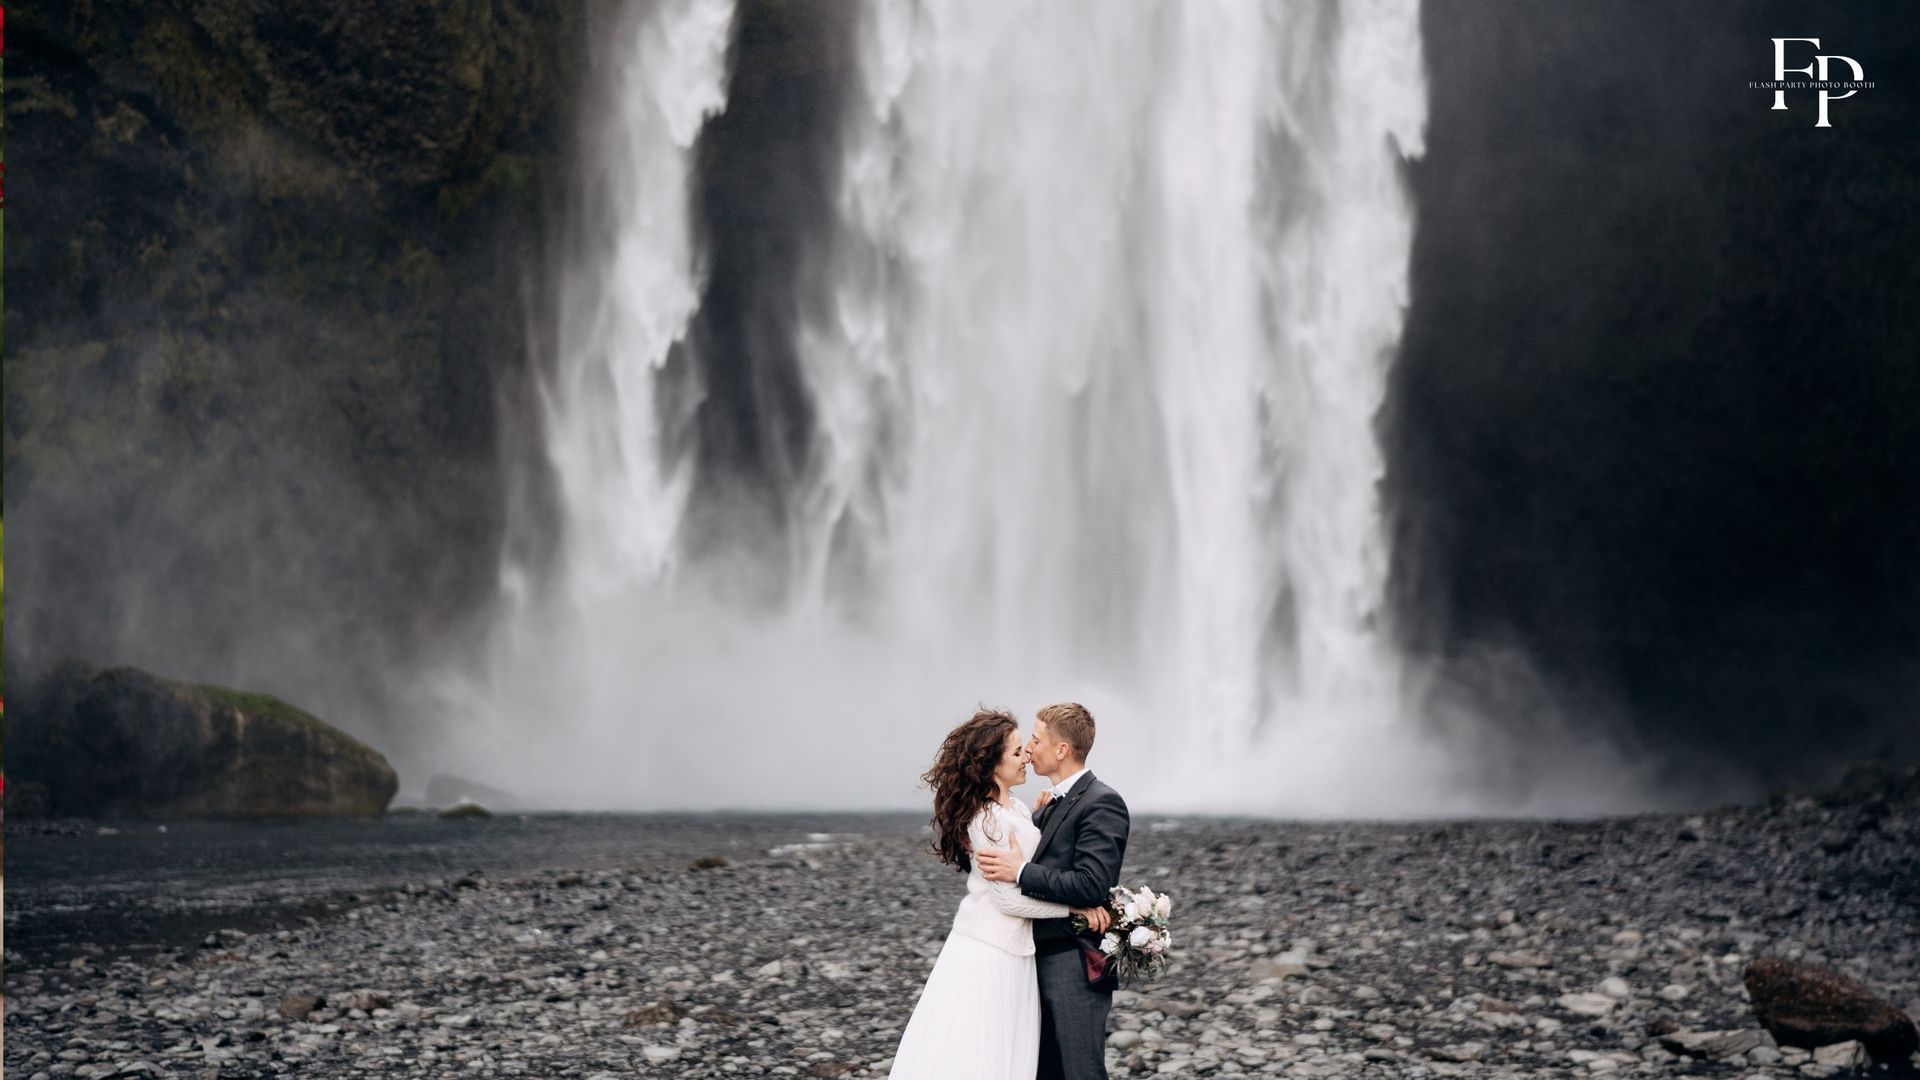 San Jose groom and bride's photo with a waterfall background during their destination wedding